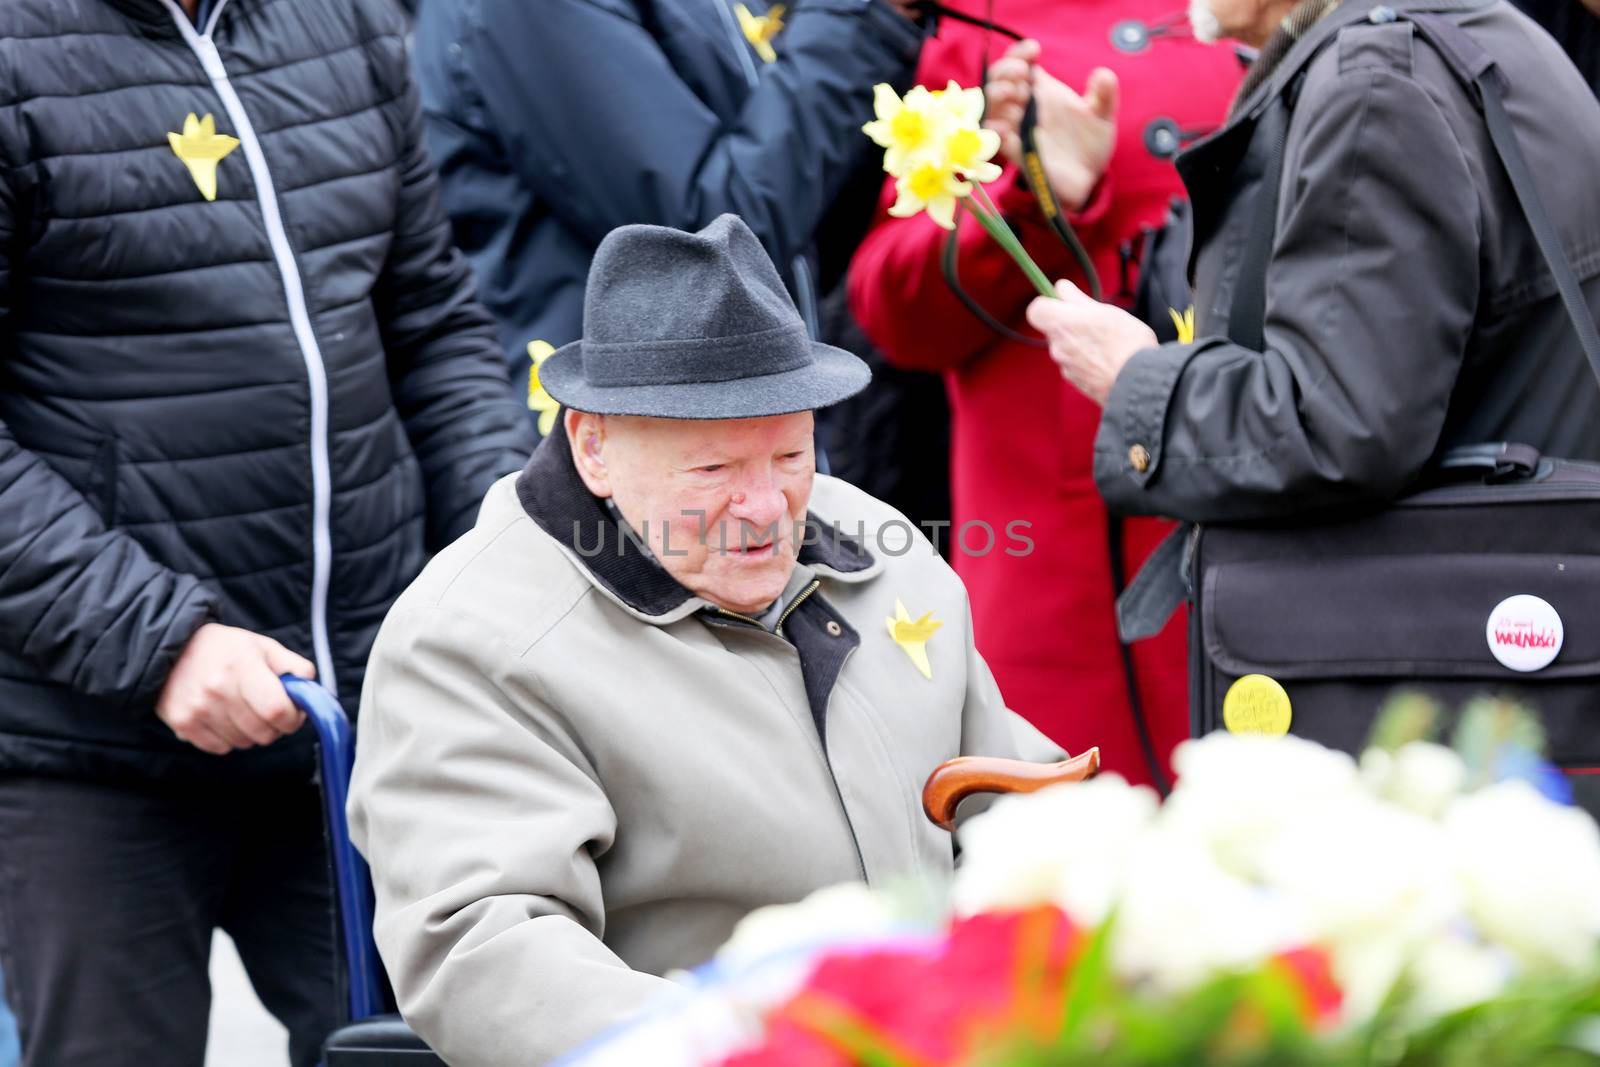 POLAND, Warsaw: An elderly man look on at the Ghetto Heroes Monument in Warsaw, Poland on April 19, 2016, on the 73rd anniversary of the Warsaw Ghetto uprising.Members of the state and local governments, ambassadors, as well as those who are Righteous Among Nations attended the anniversary. The ceremony took place at the spot of the first armed clashes in 1943. The uprising started when Jewish residents of the ghetto refused surrender to the Nazi police commander. The entire ghetto was burned and the clashes ended on May 16. An estimated 13,000 people in the ghetto were killed in the revolt.